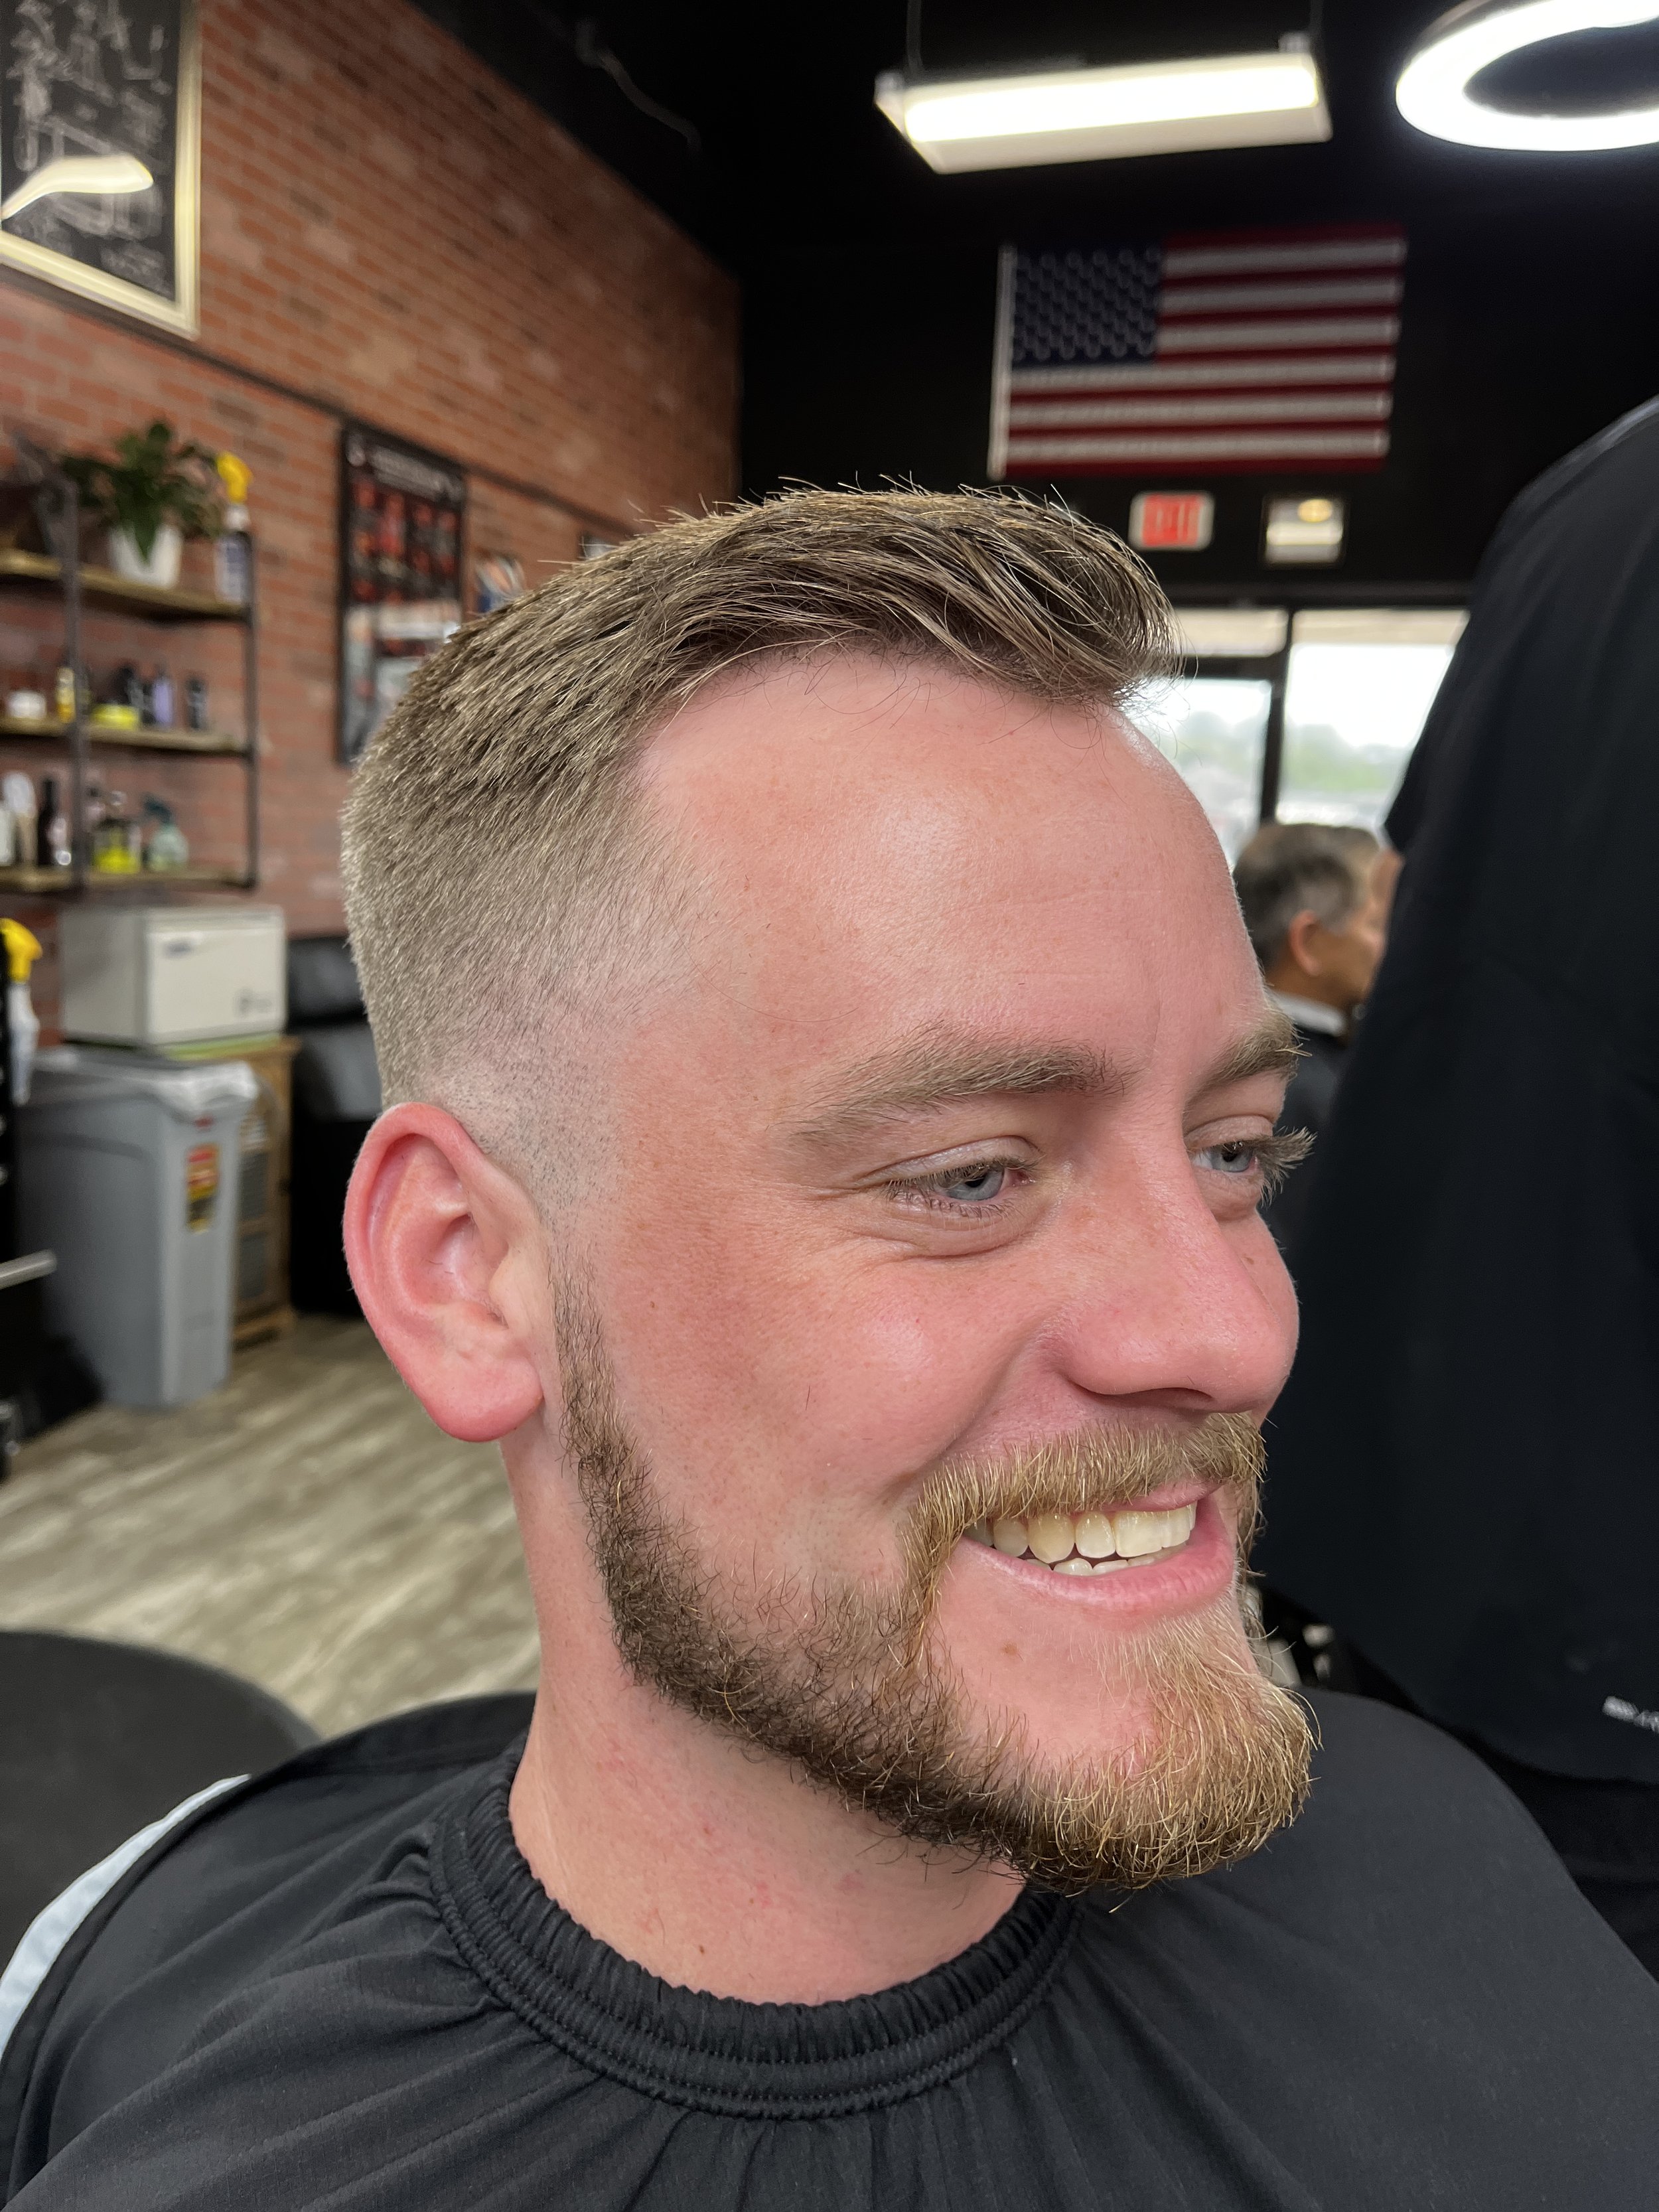 Jacksonville haircut and shave